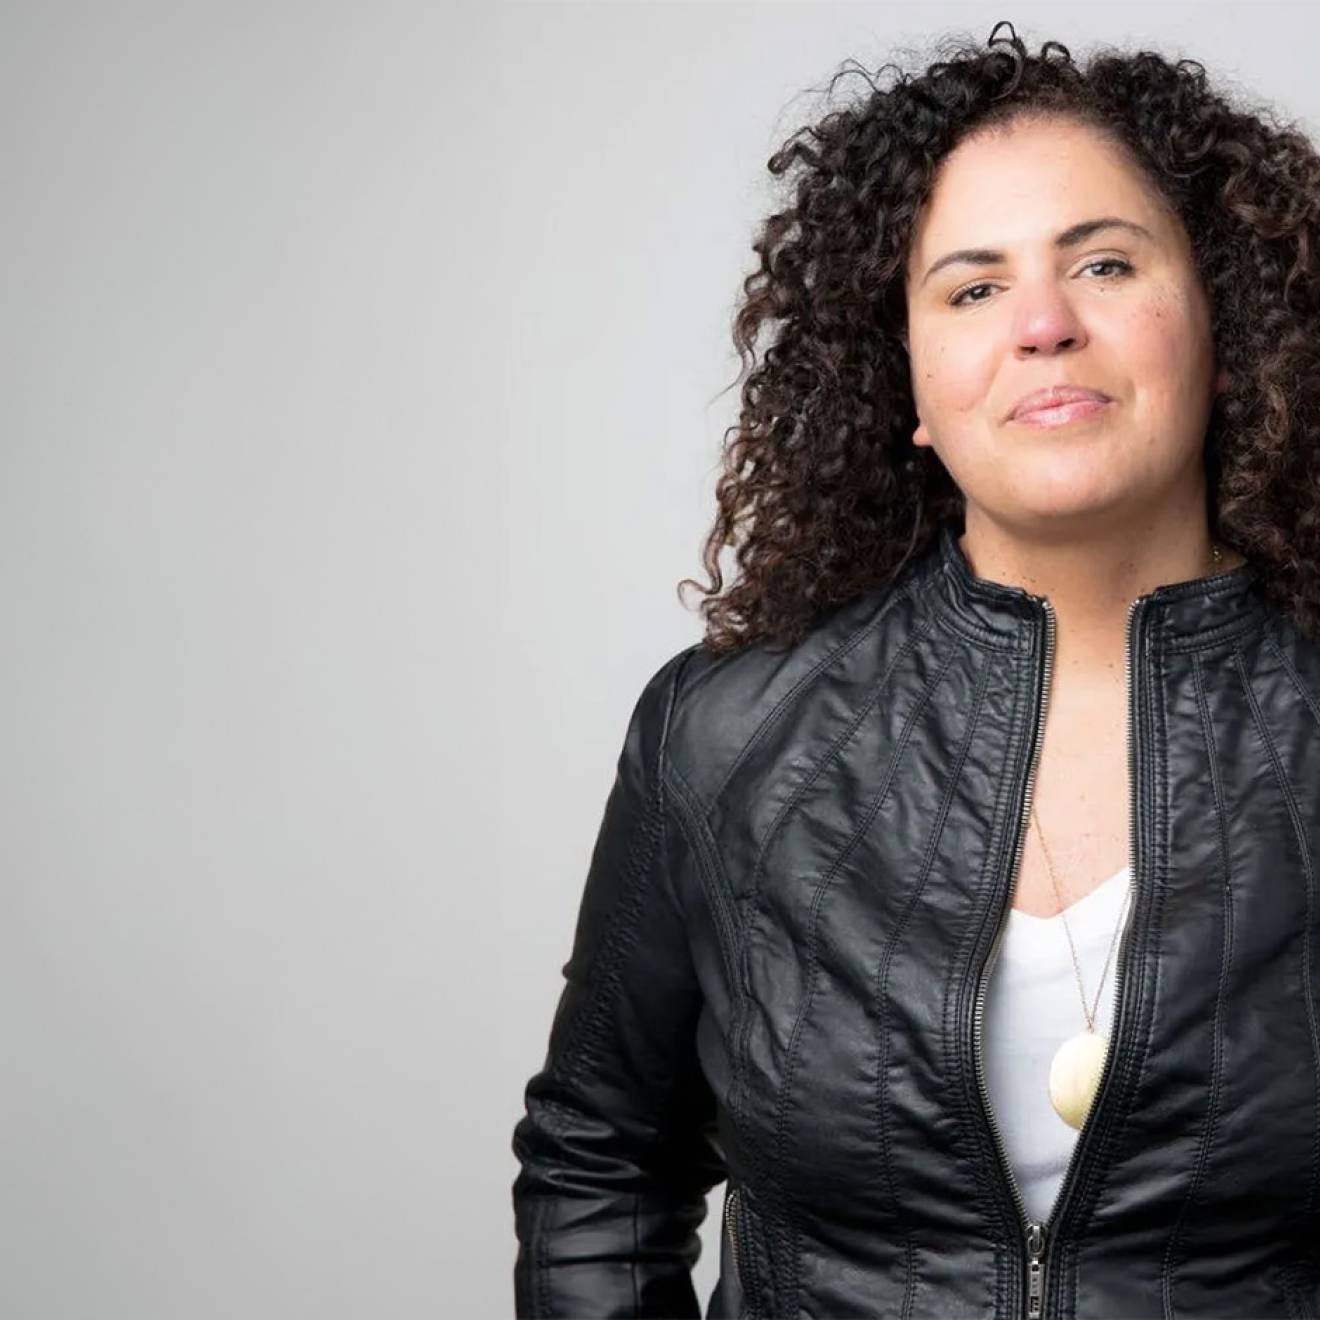 Safiya Noble, wearing a cool black leather jacket, looks resolute in a waist-up portrait against a gray background